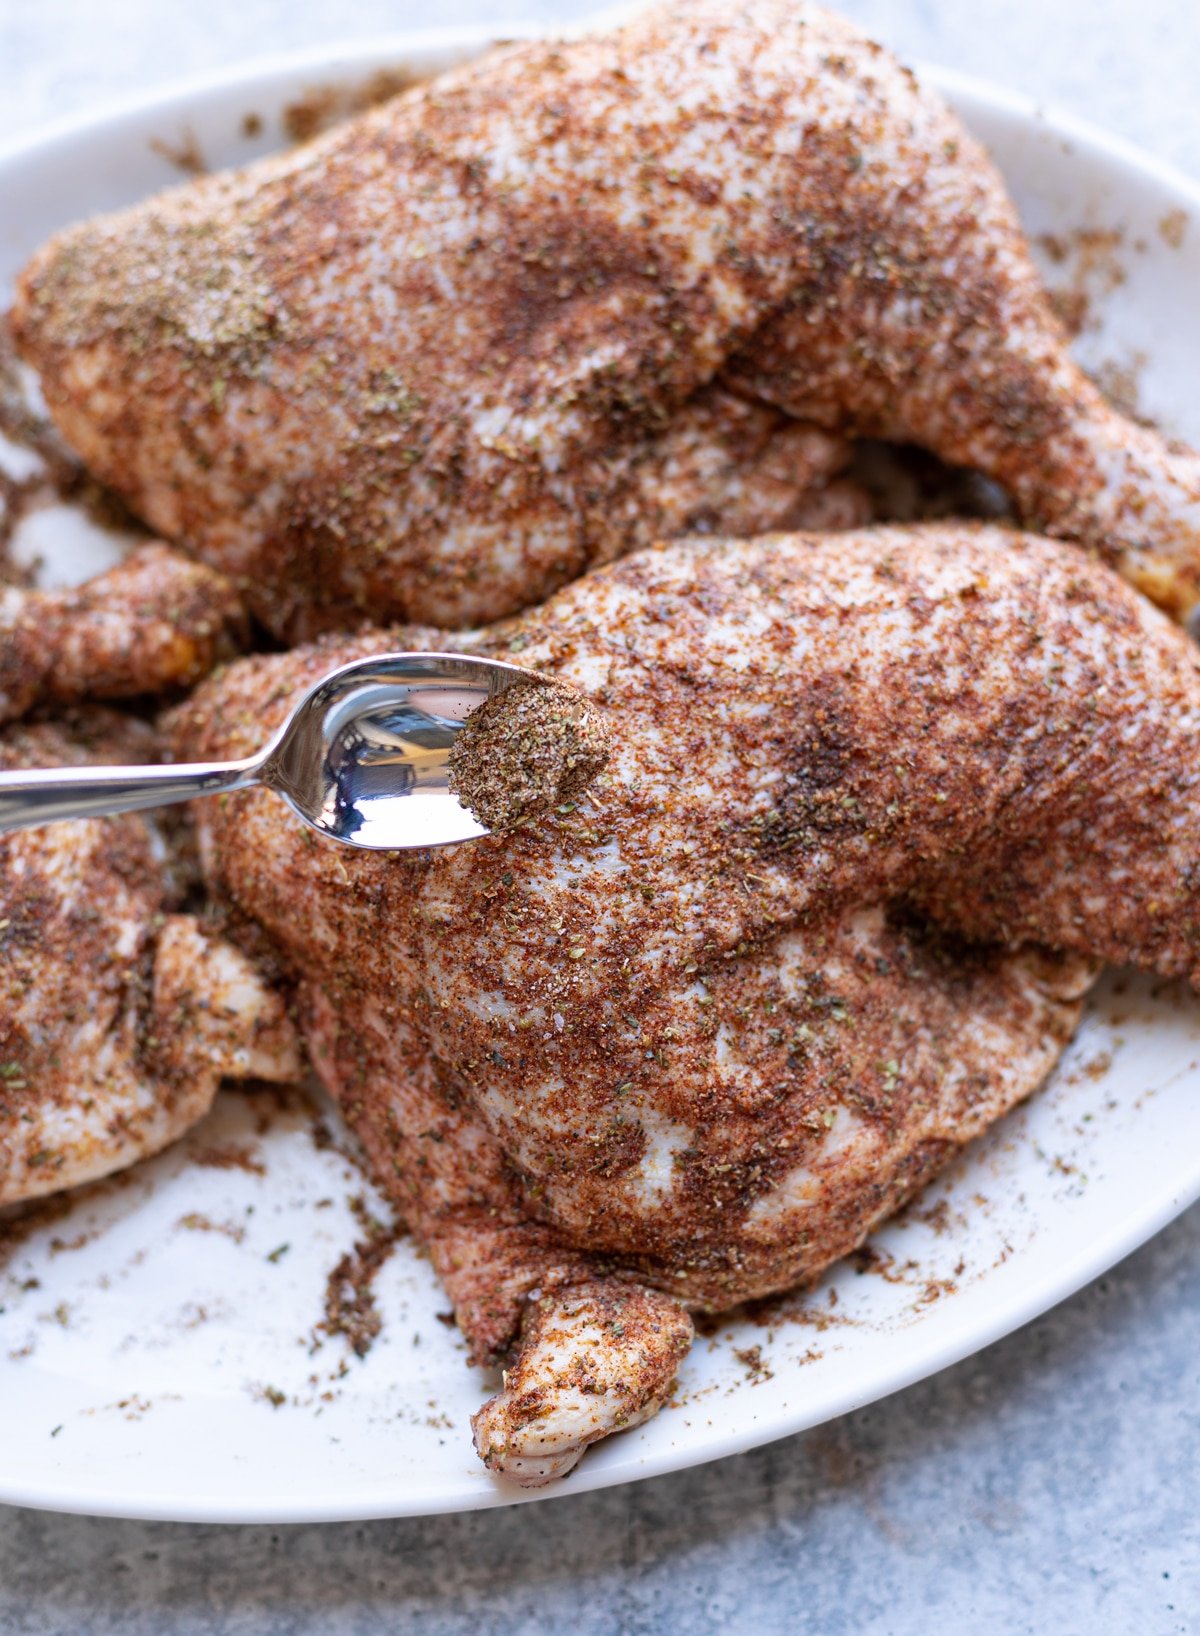 Spice mixture being applied to chicken with a spoon.